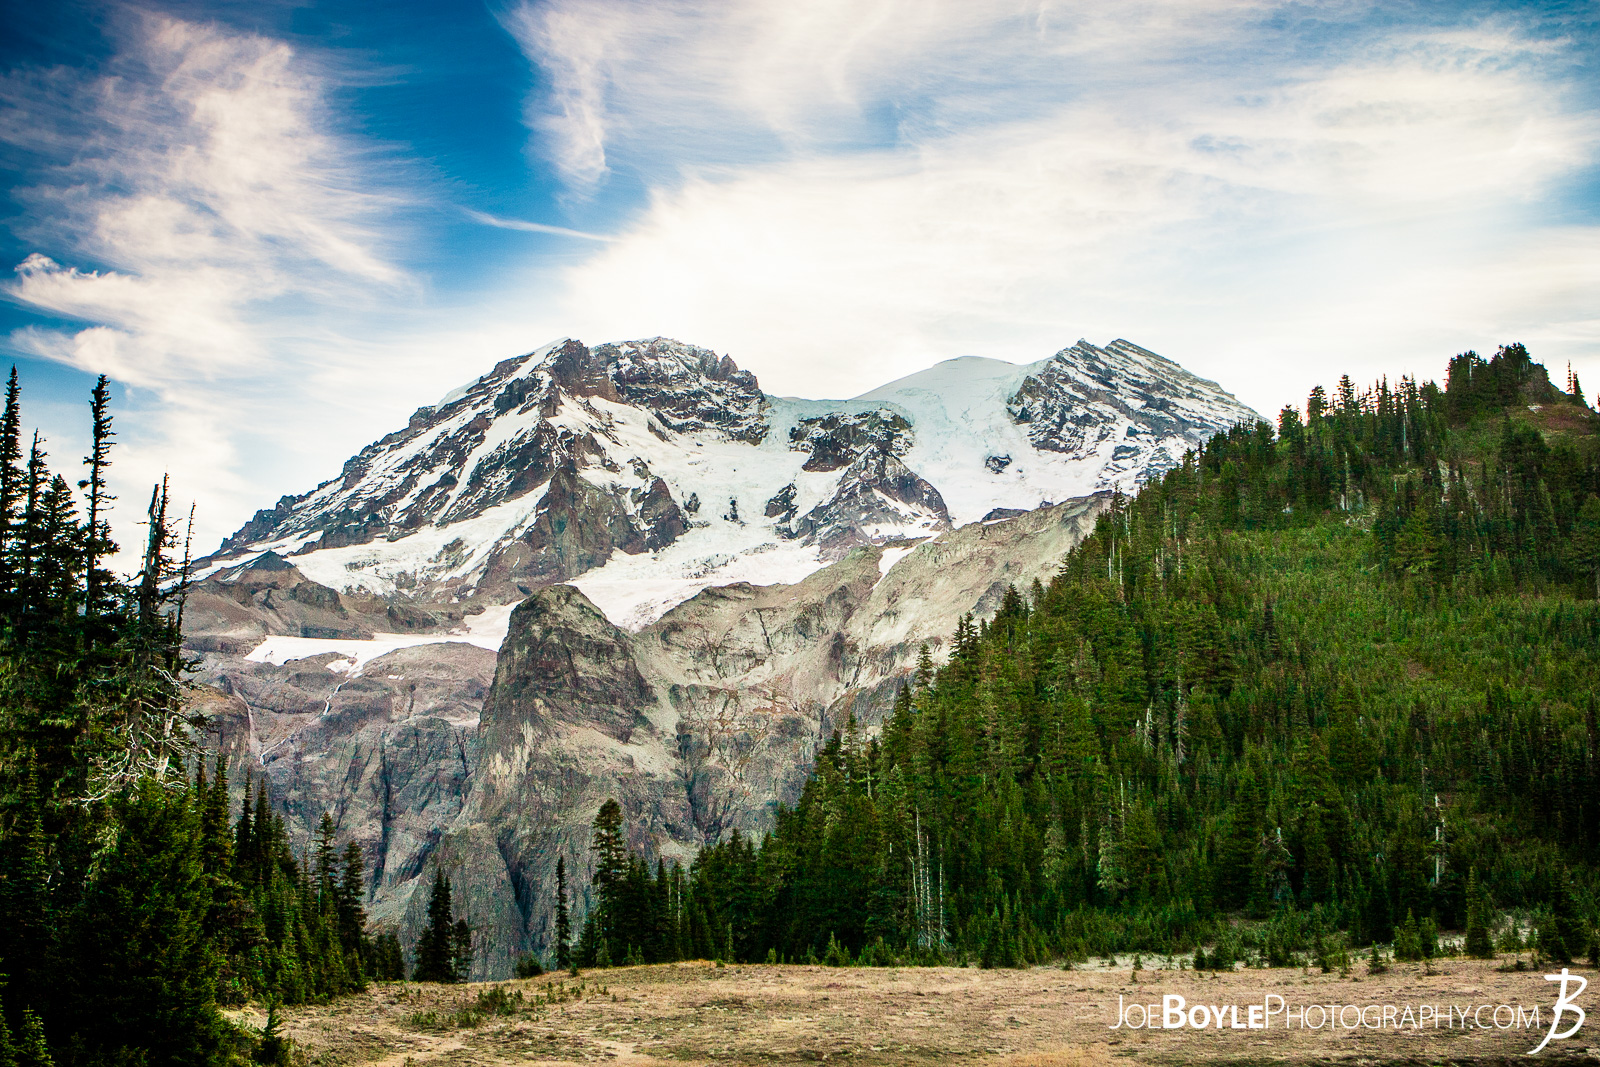  This was our view in the morning of Mount Rainier after our stay at the Klapatche Park Campground. 